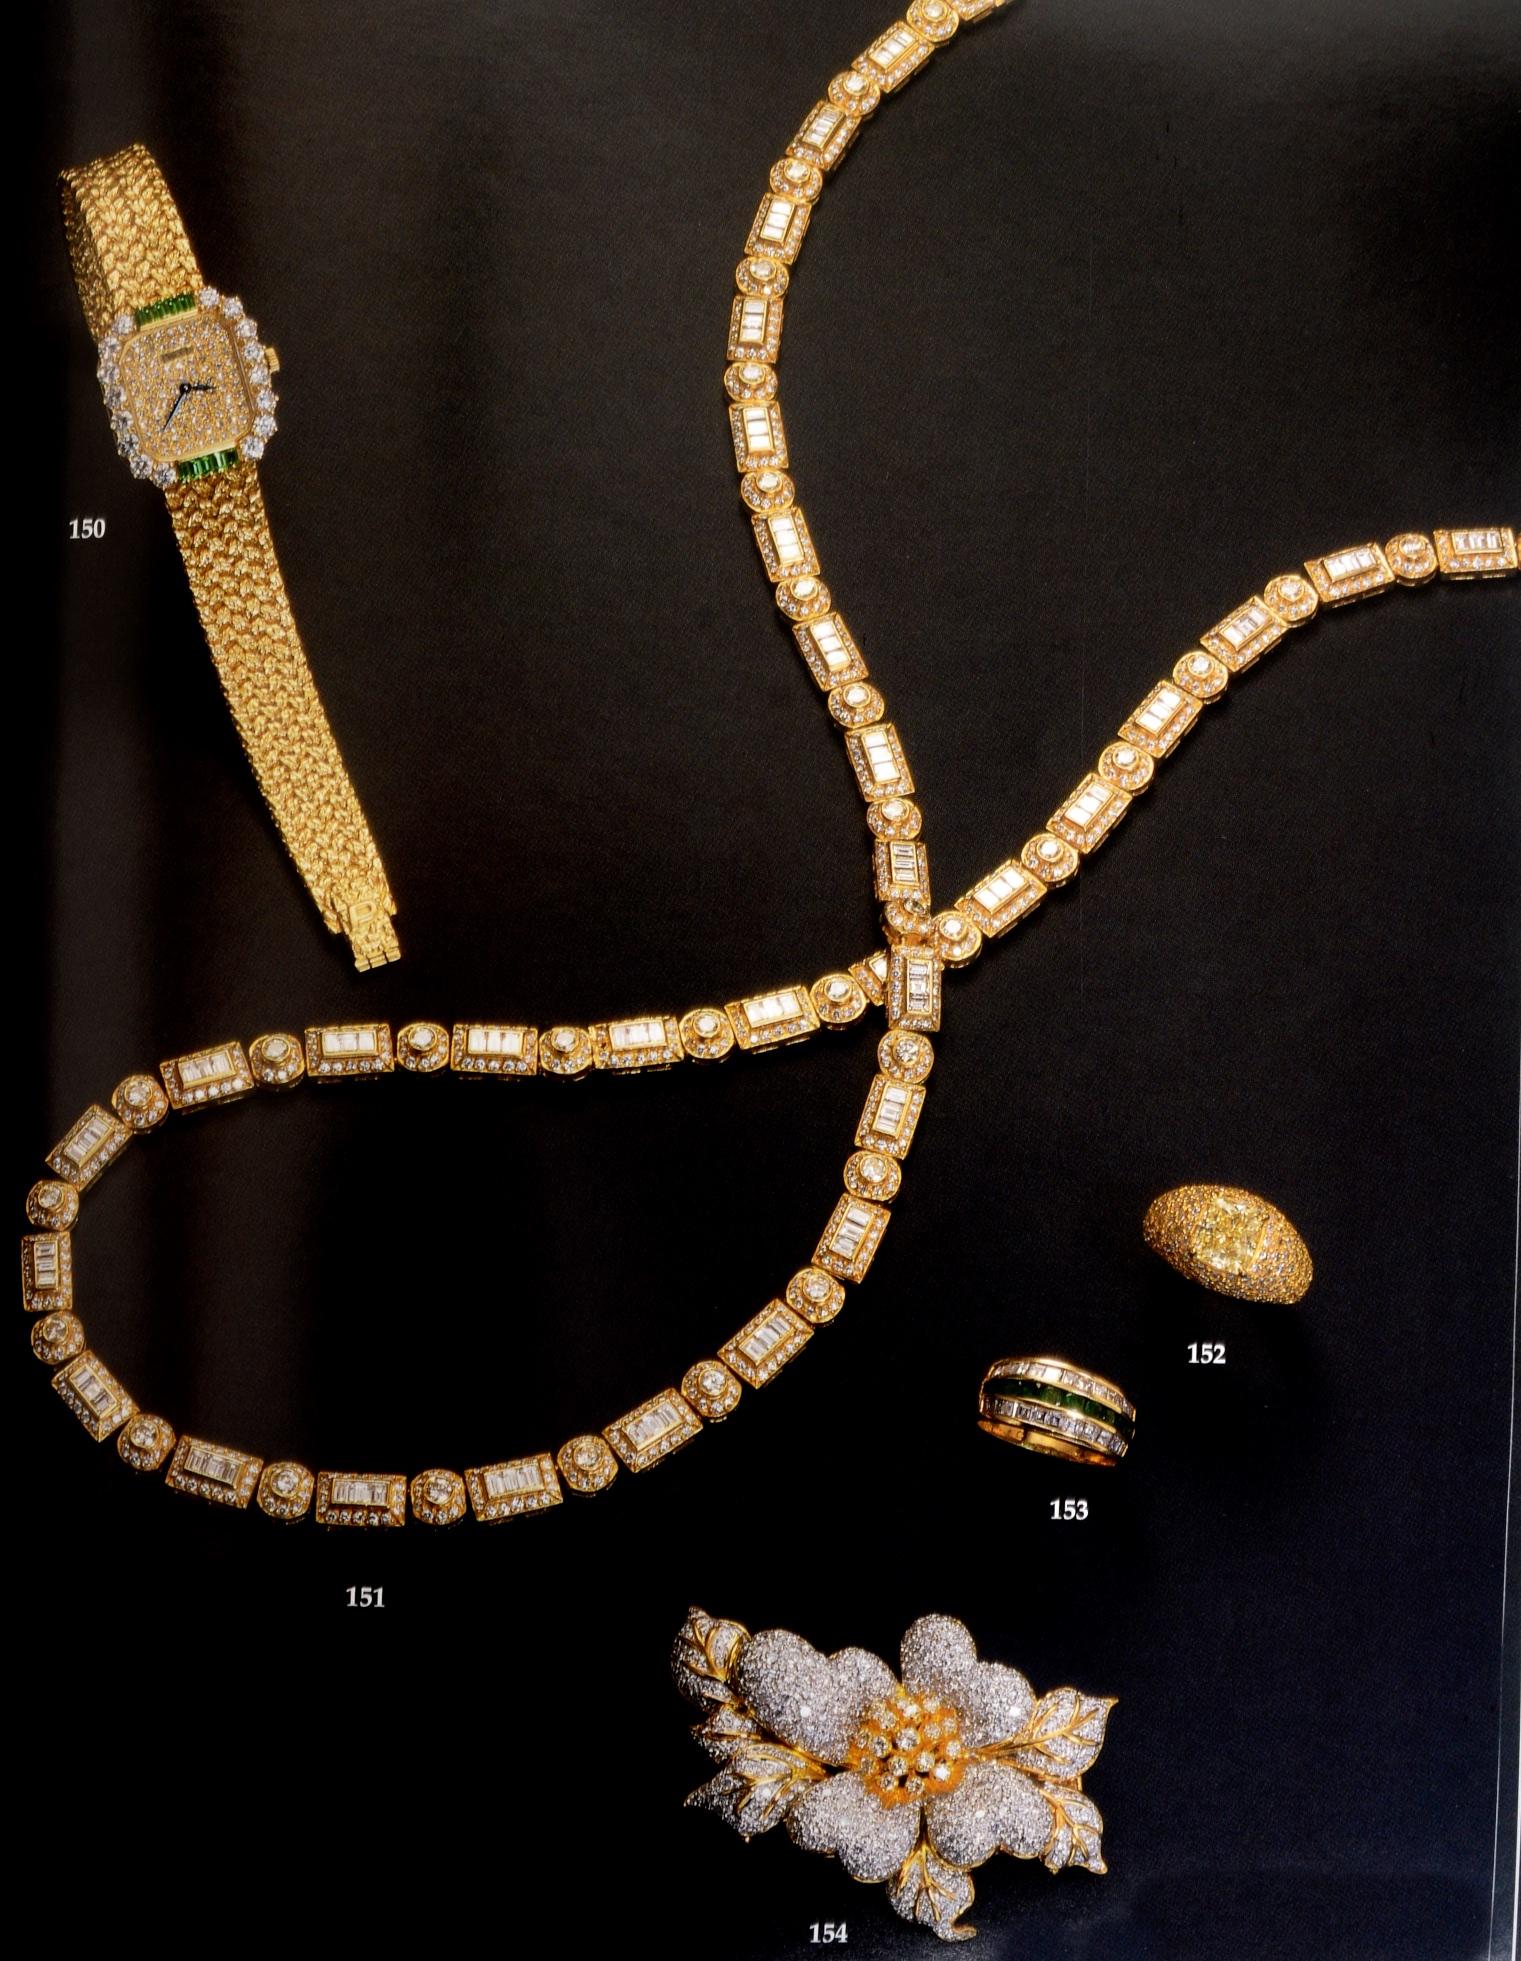 Fine Jewels and Watches. Sotheby's Sale 7312, Los Angeles, May 4, 1999 For Sale 8